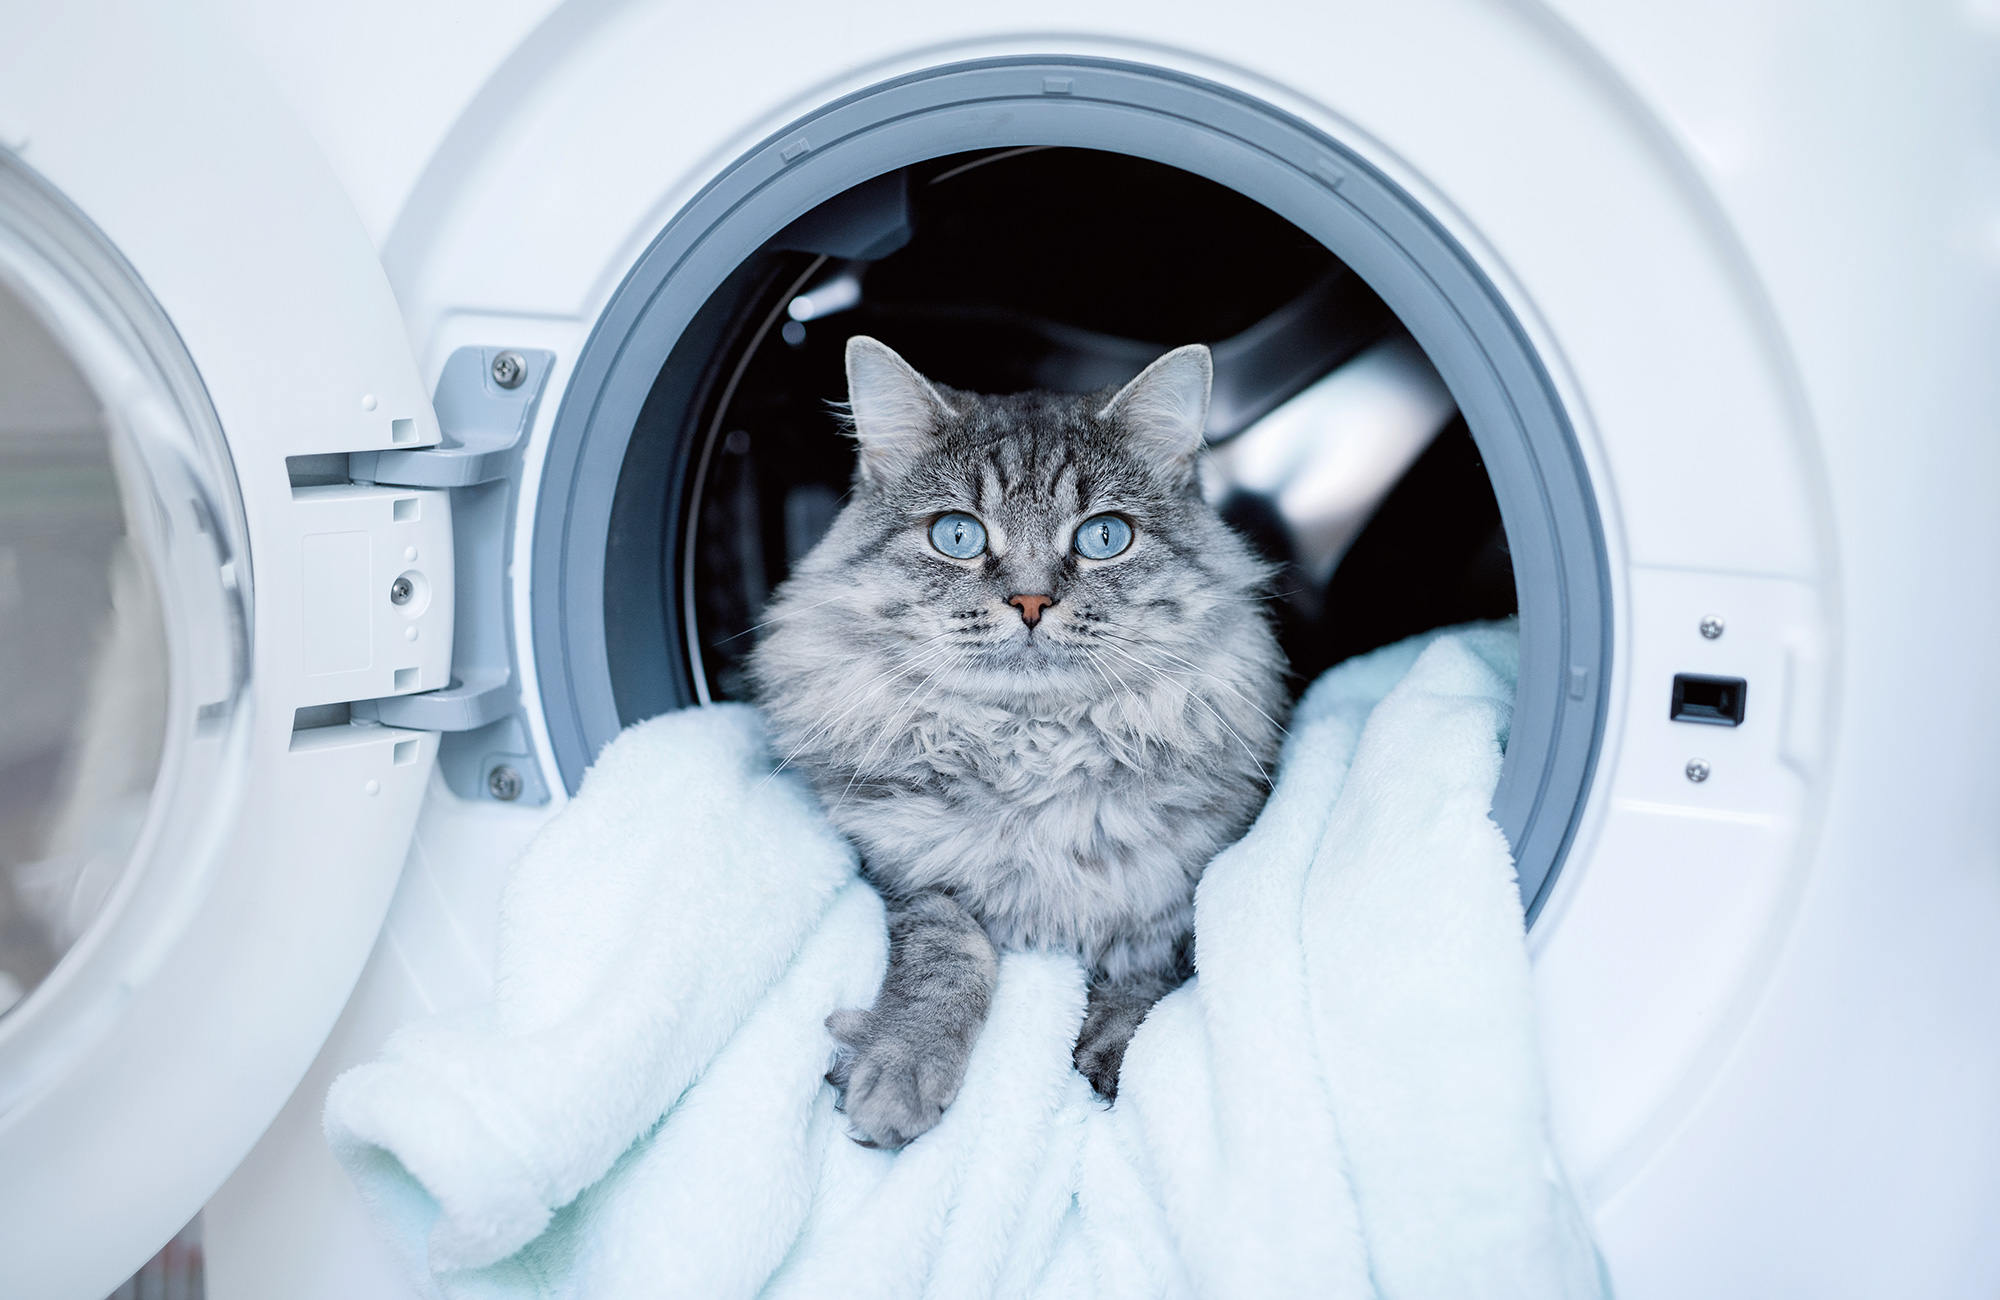 Does washing clothes get rid of cat hair?